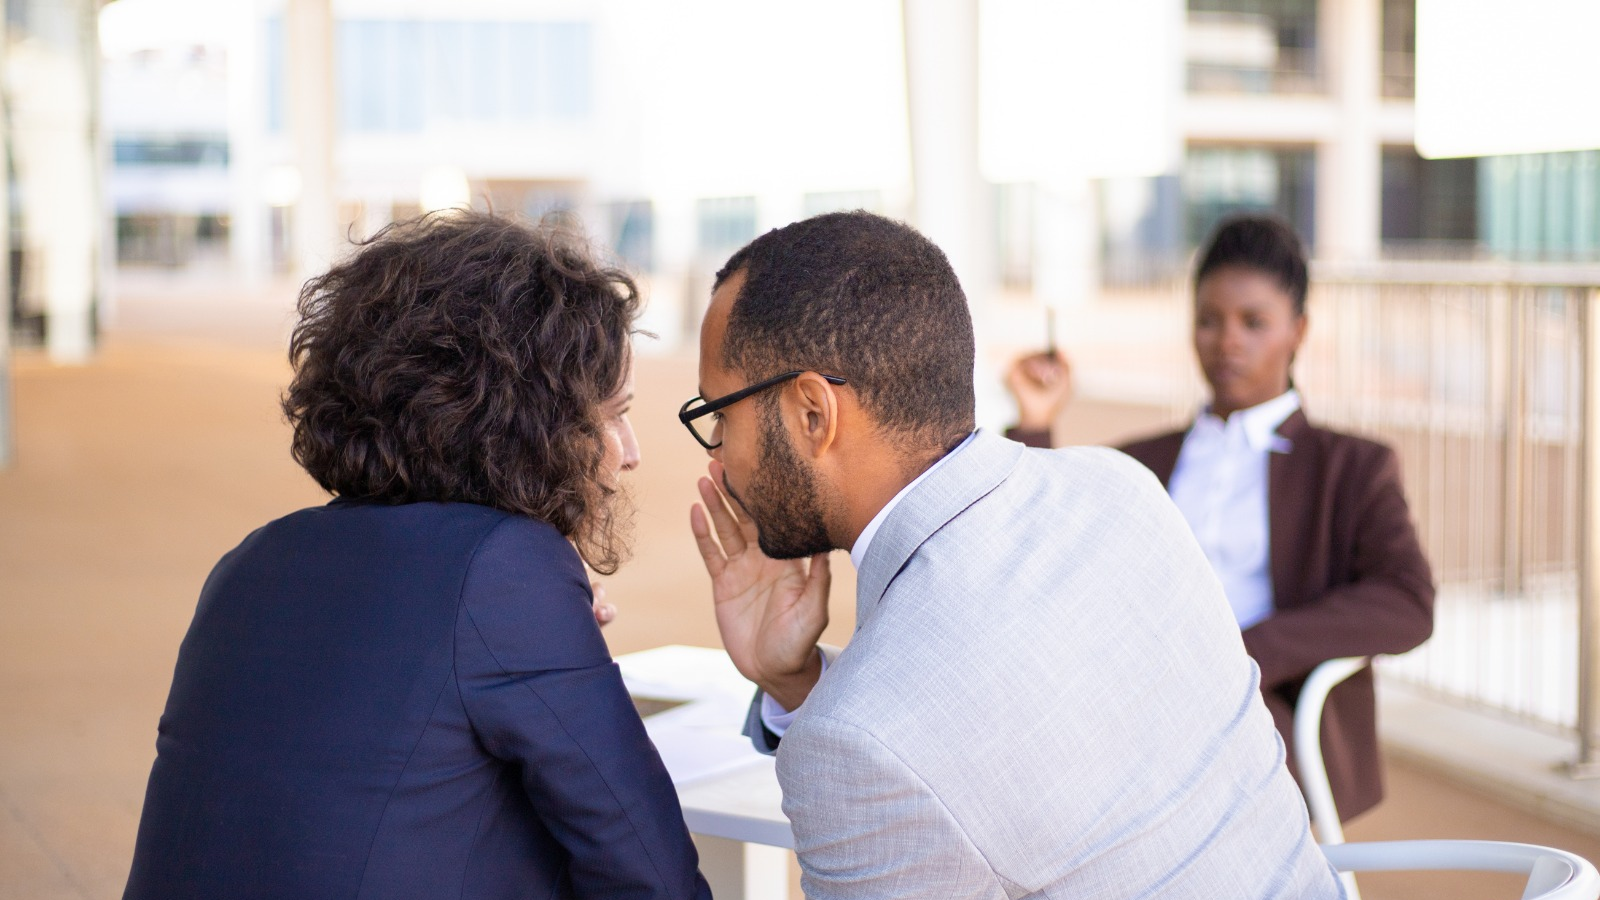 How to Deal with Gossip and Negativity in the Workplace?